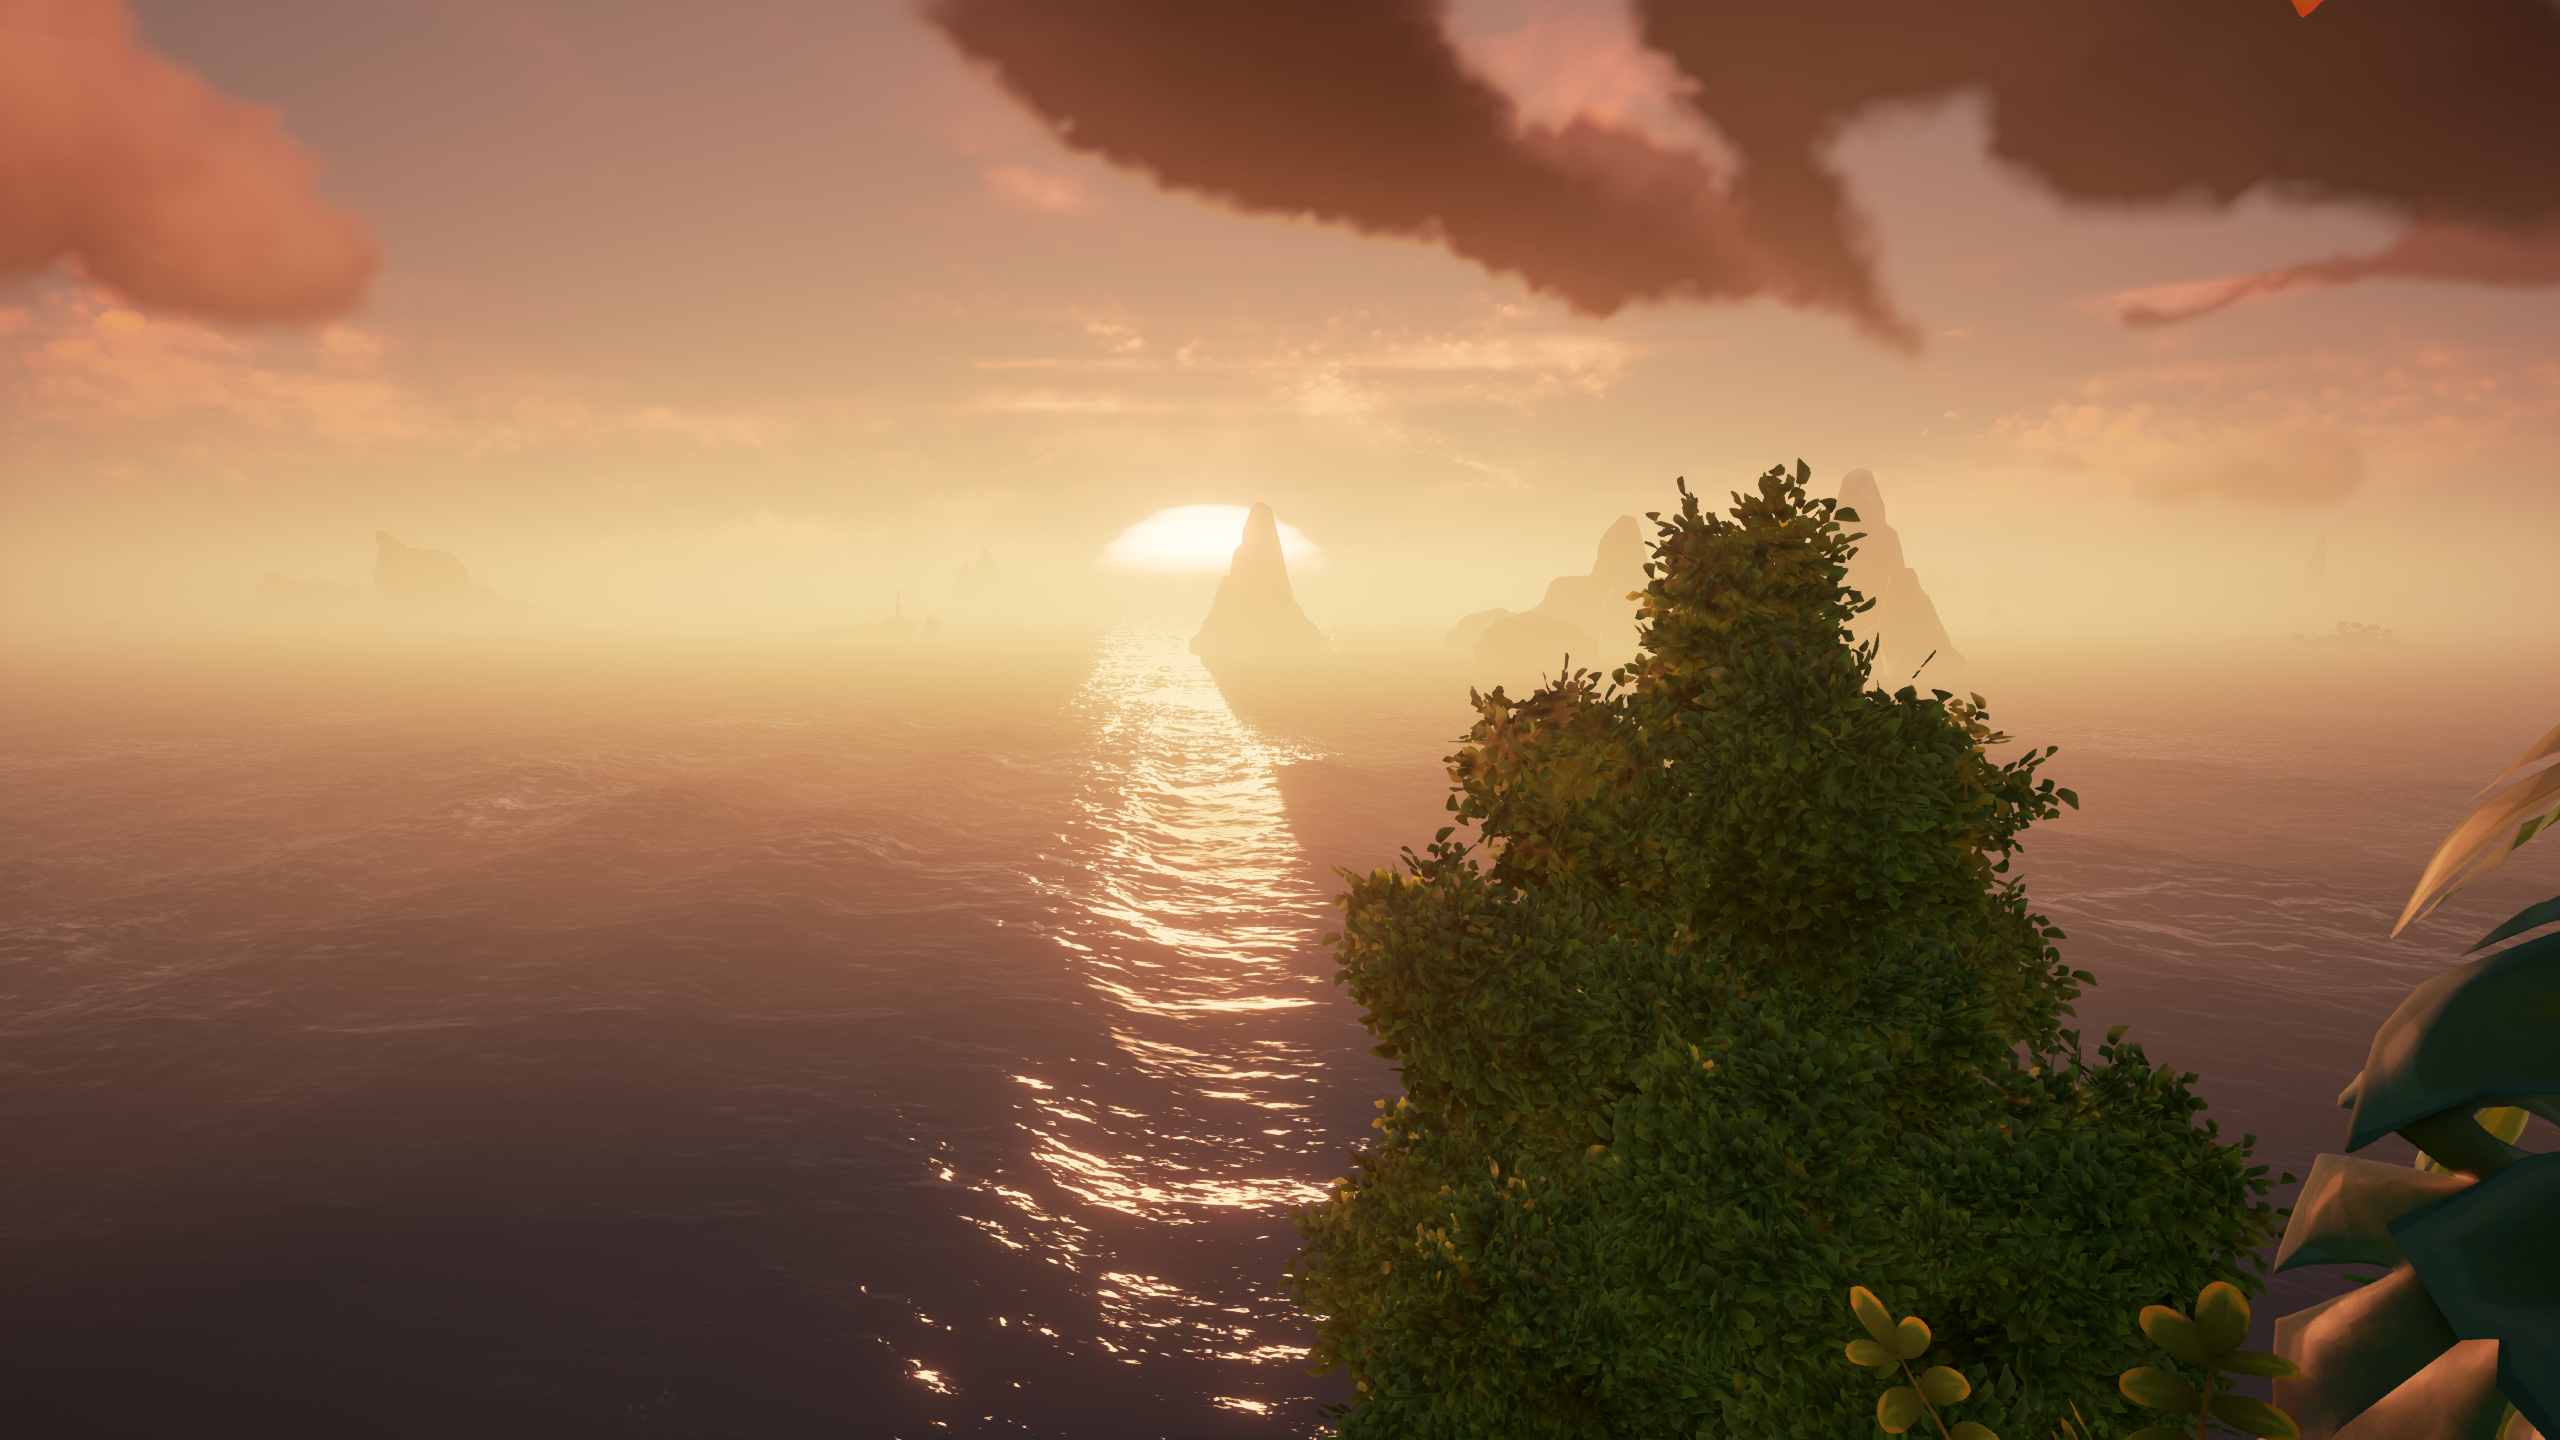 Sea Of Thieves SoT Video Games Landscape Beach Ocean View Sunset Water CGi 2560x1440